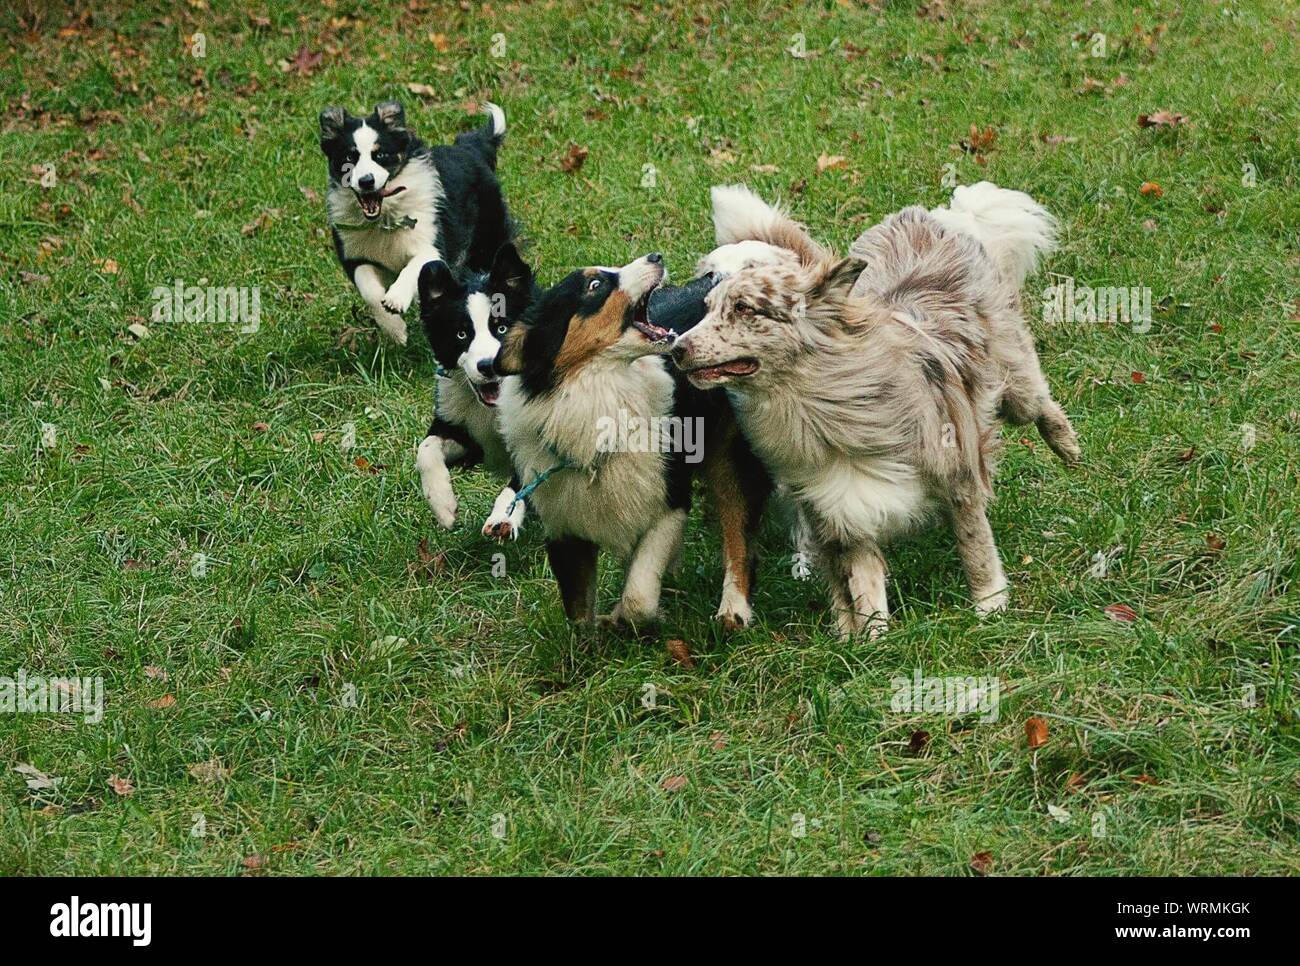 Dugs High Resolution Stock Photography and Images - Alamy